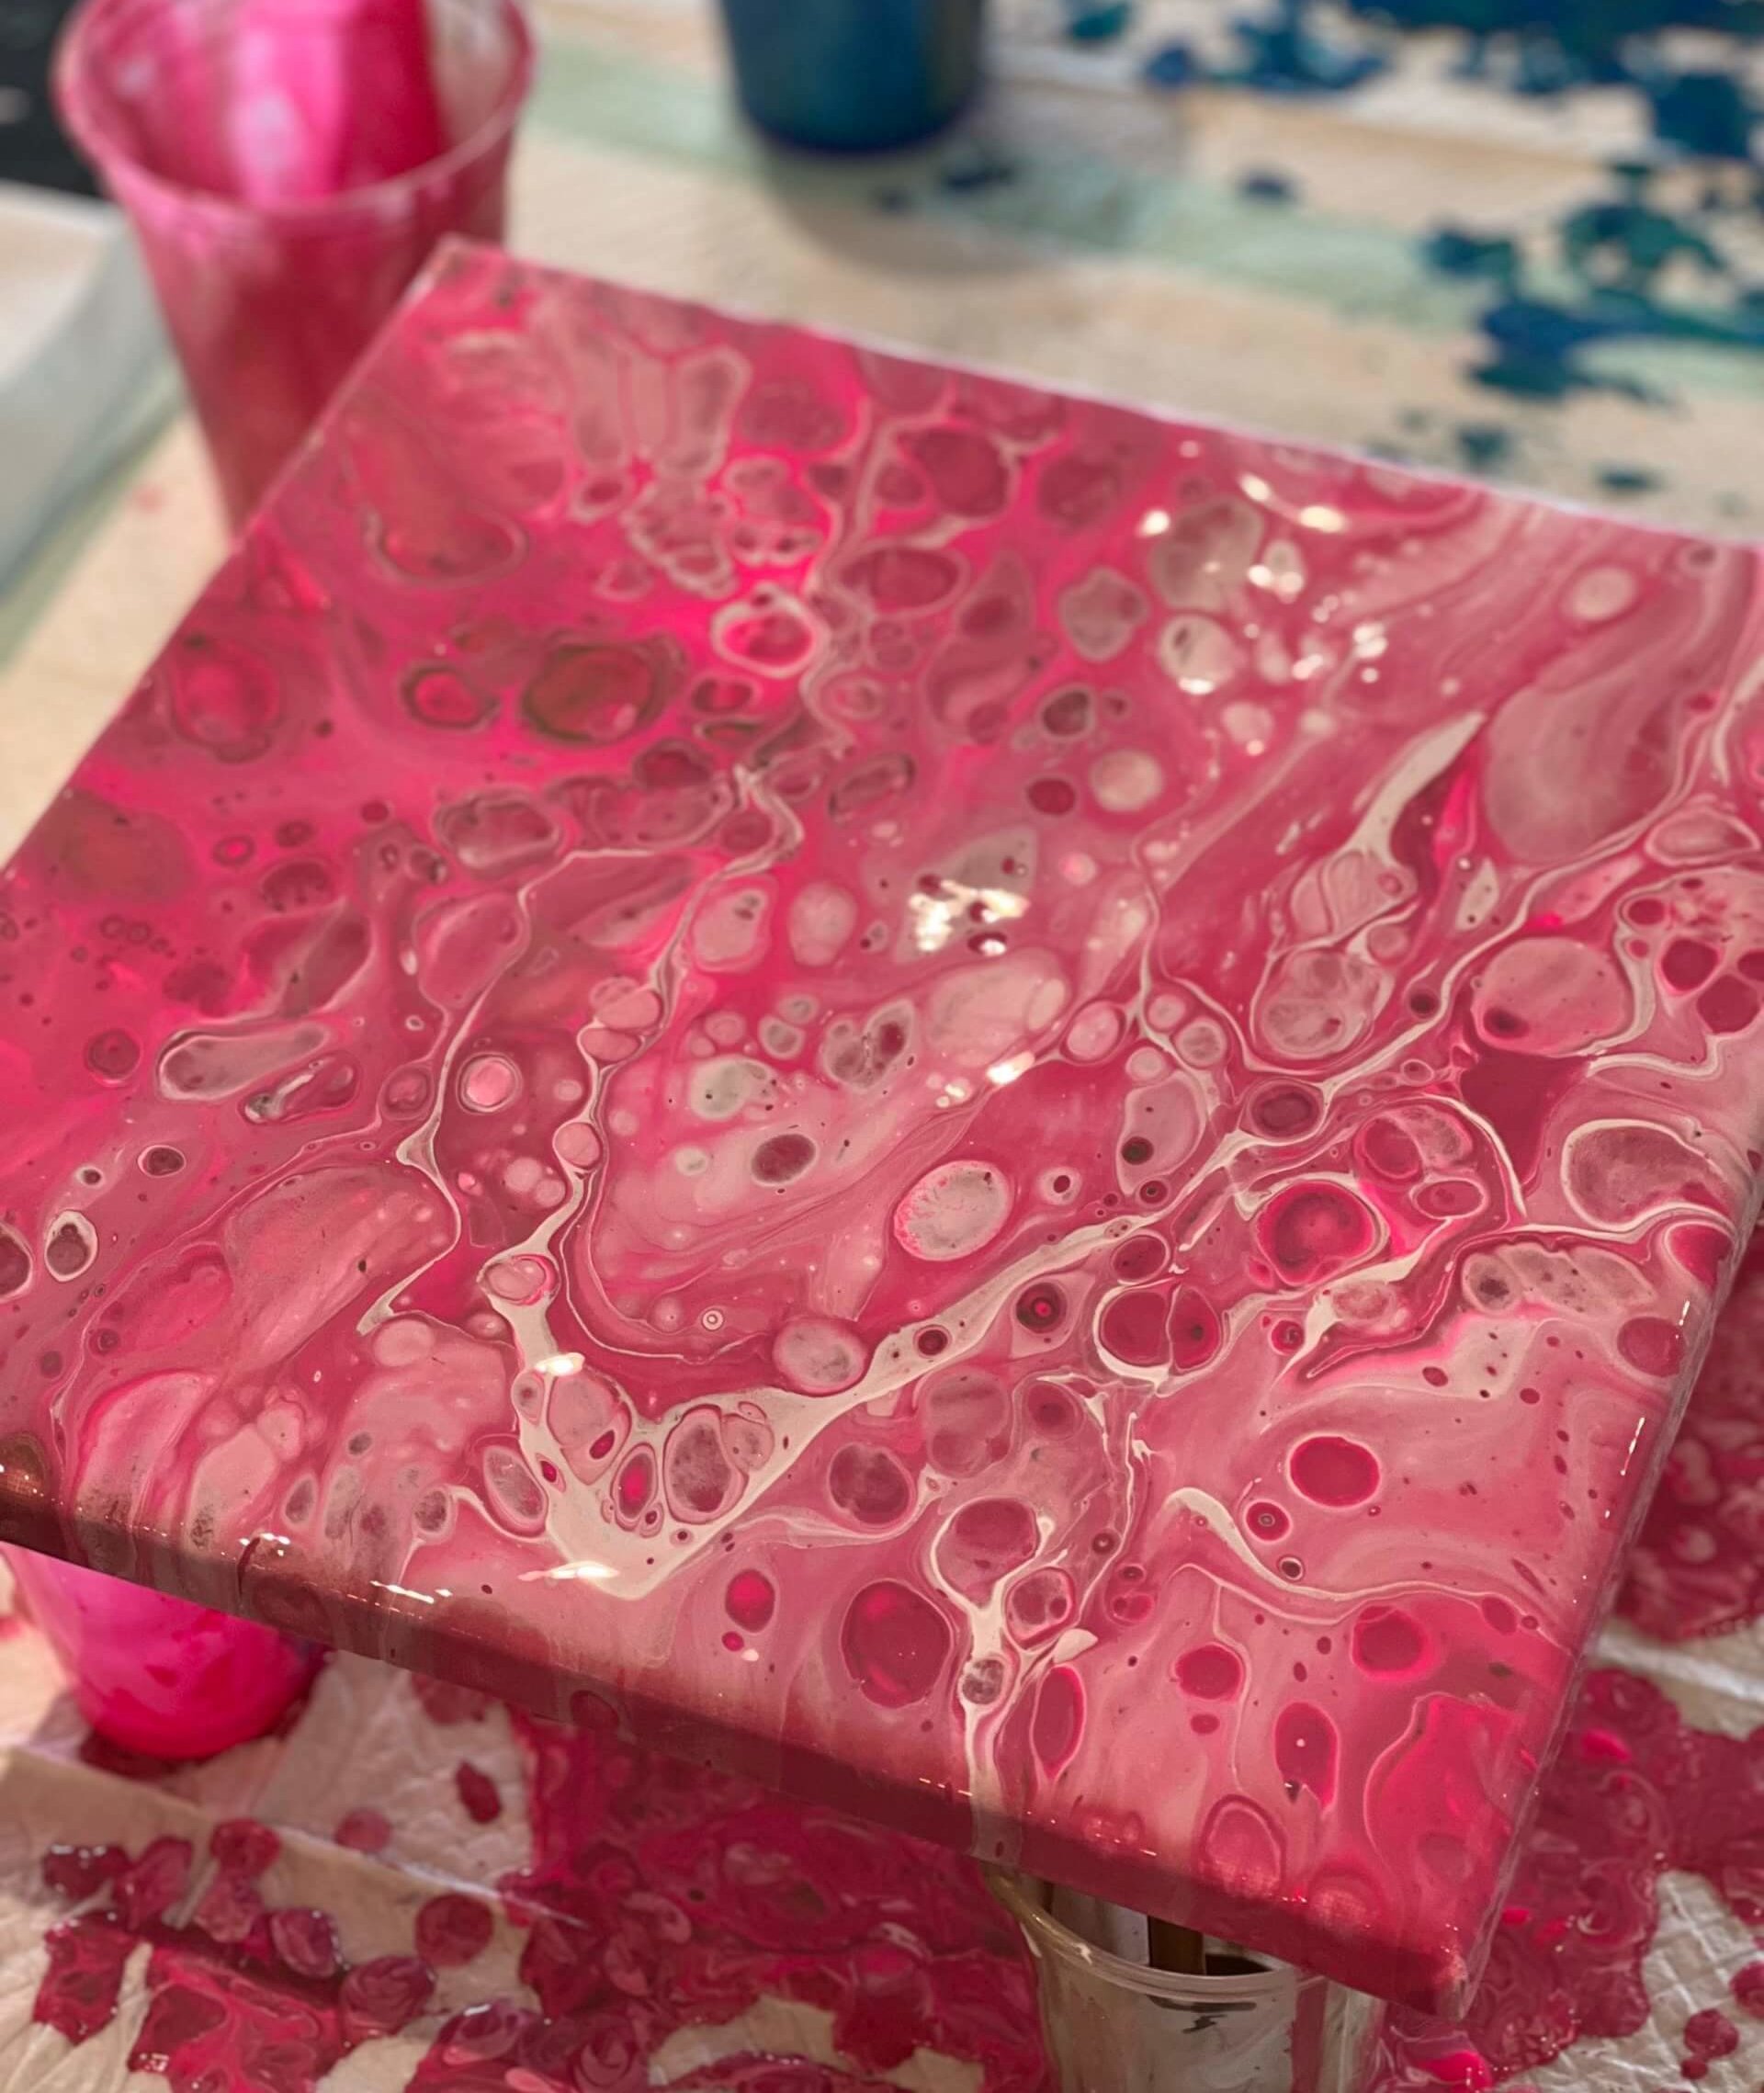 Pour Your Heart Out-Couples Acrylic Pour February 11